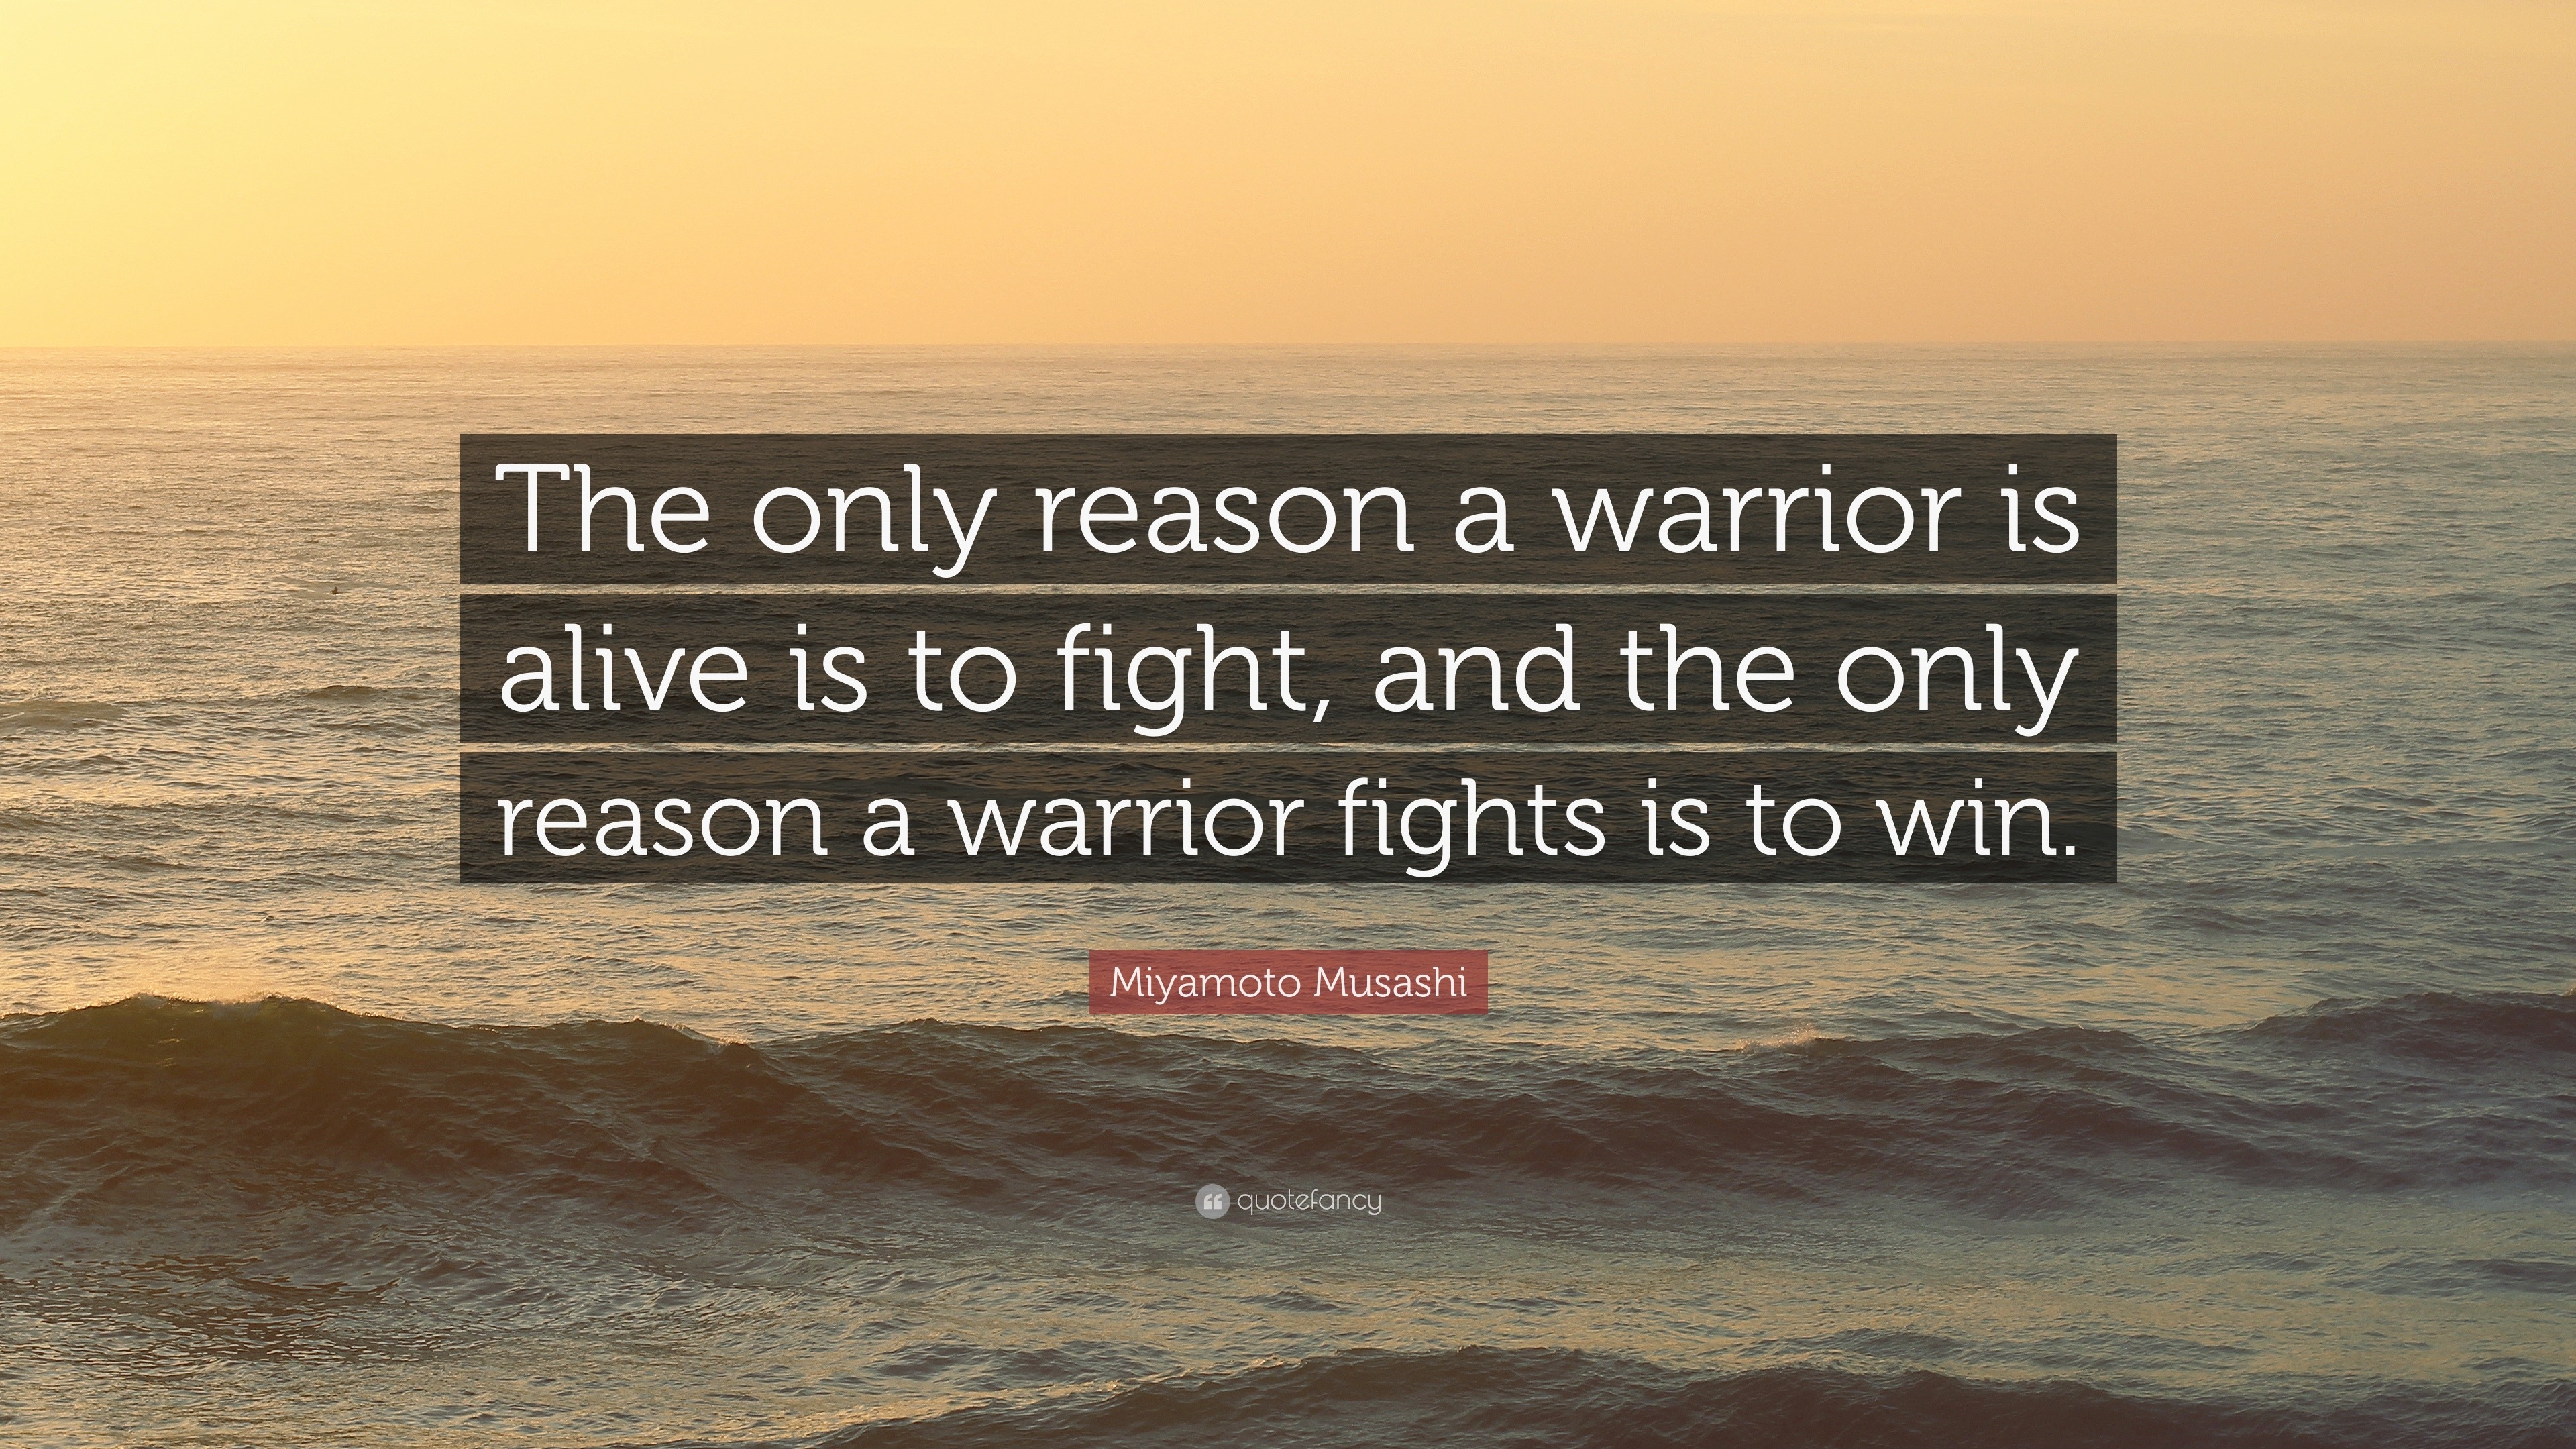 Miyamoto Musashi Quote: "The only reason a warrior is ...